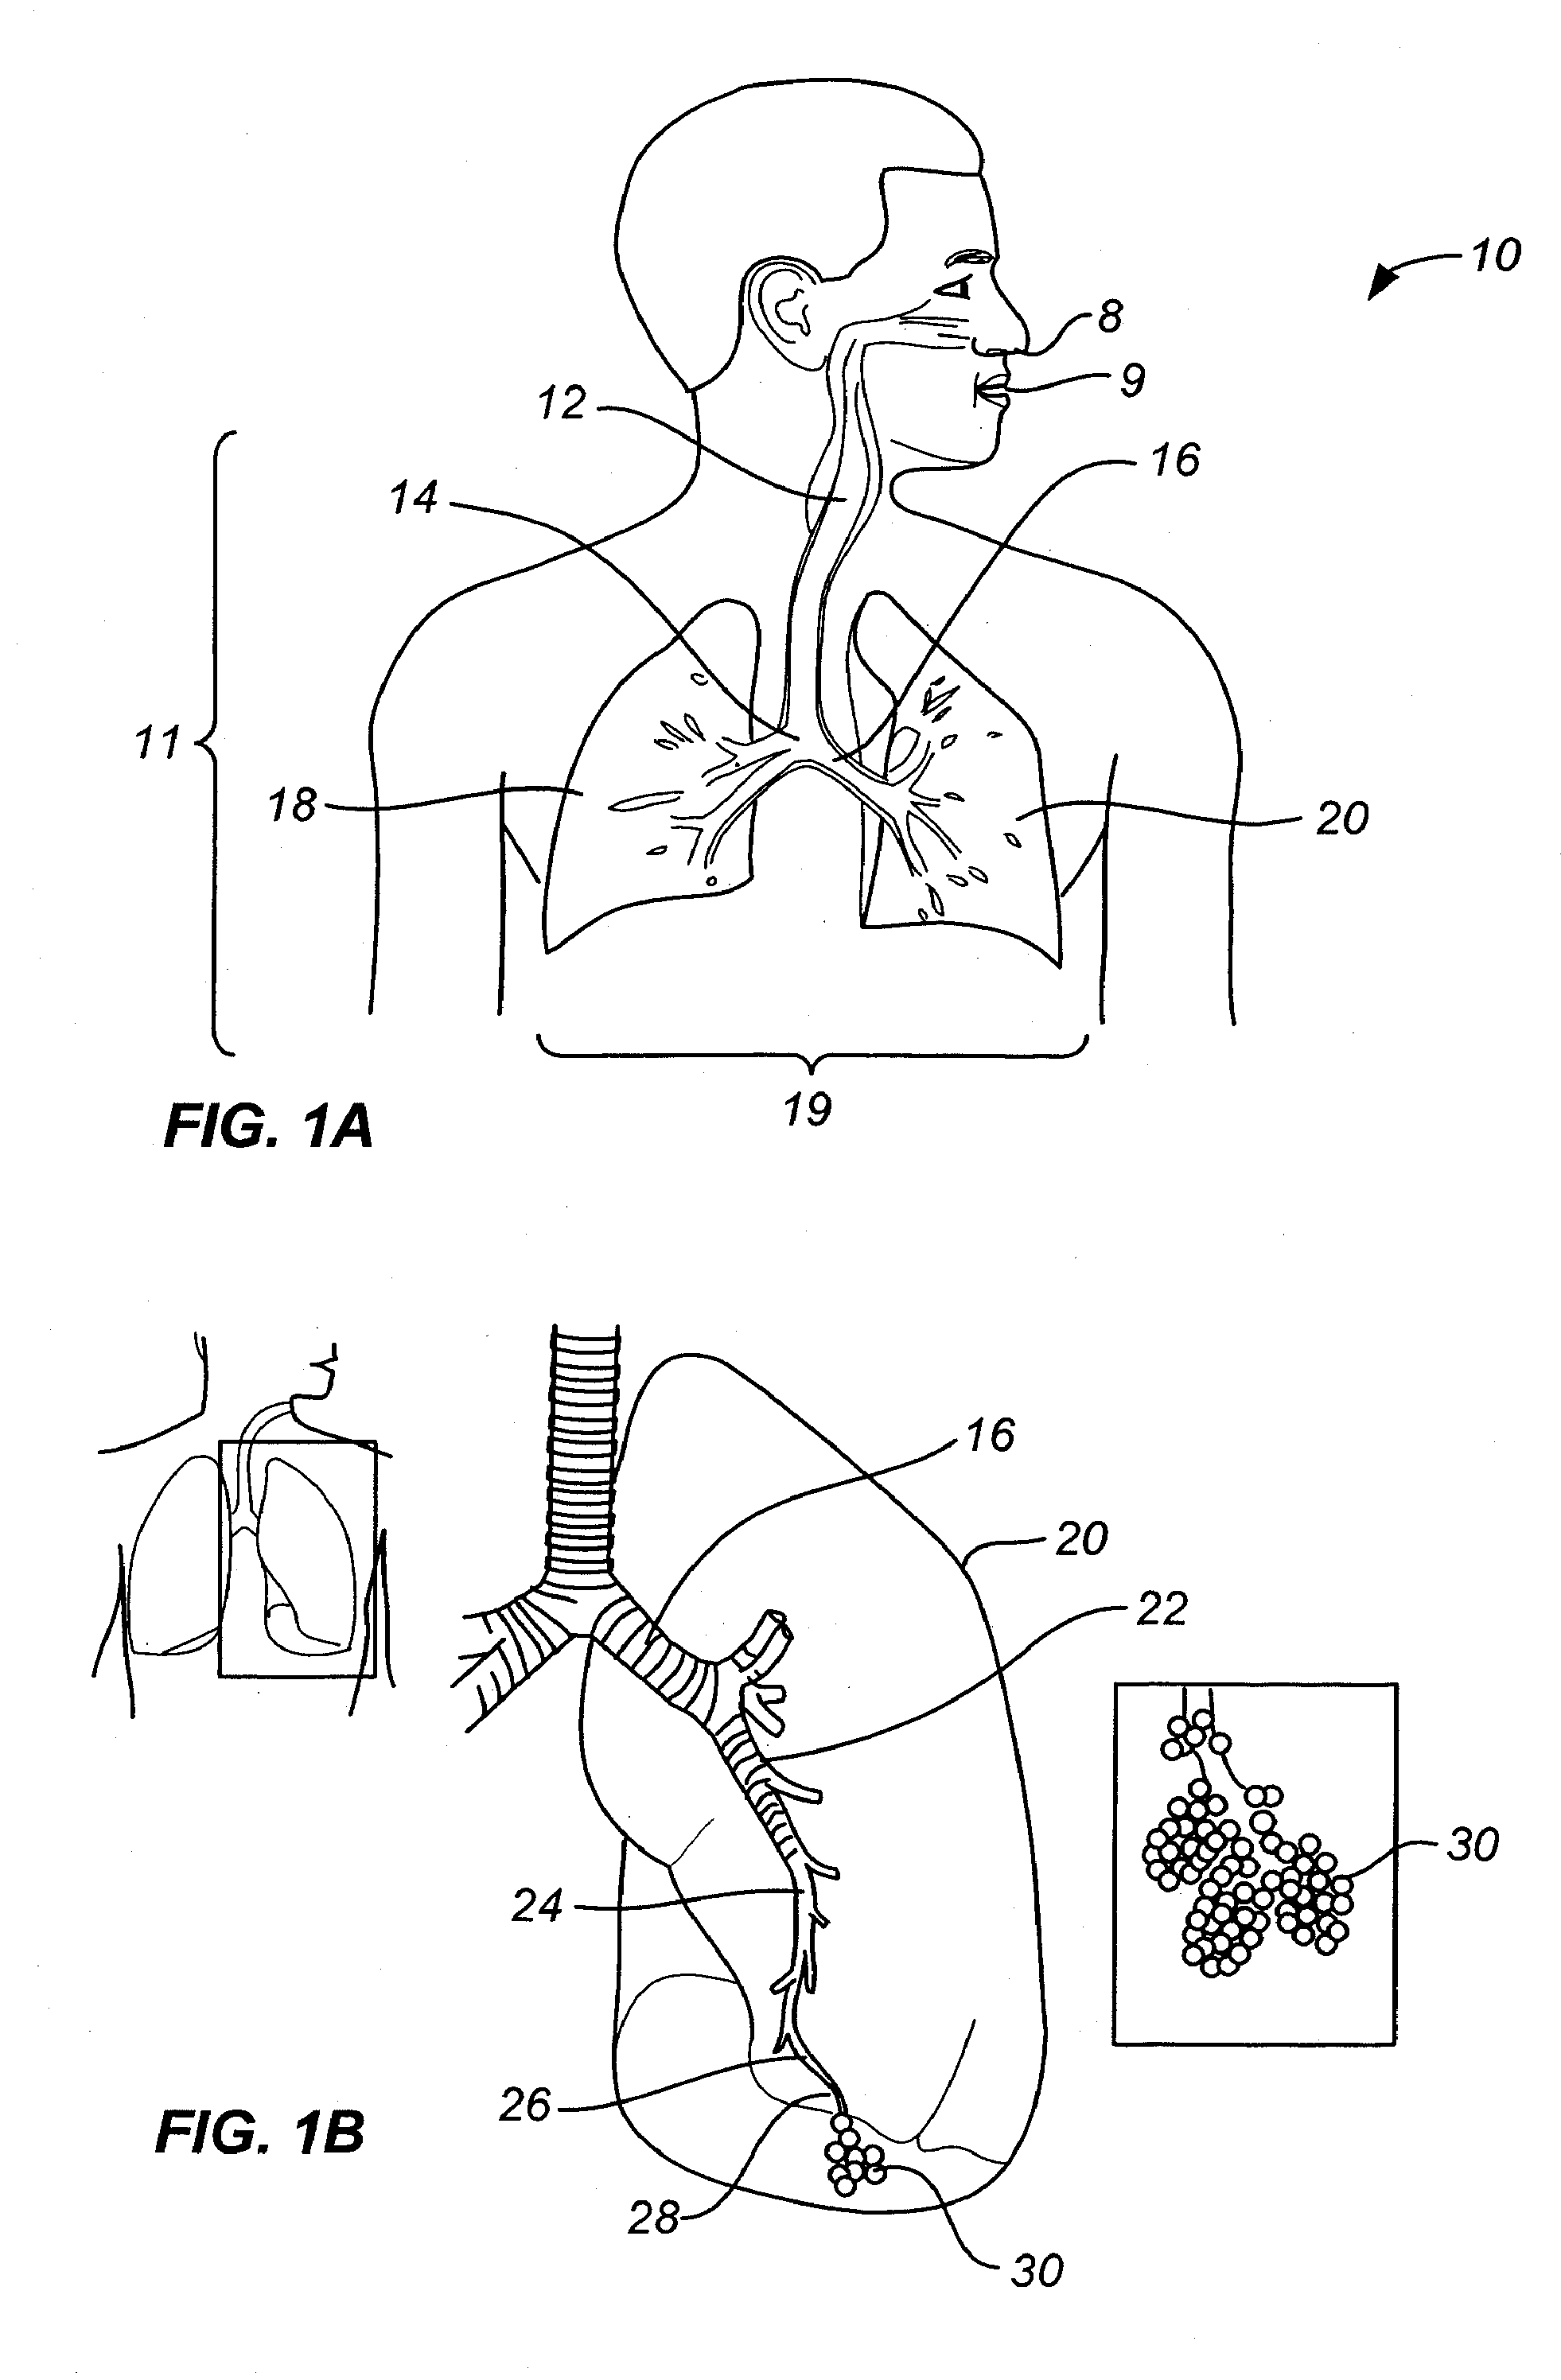 Minimally invasive lung volume reduction device and method